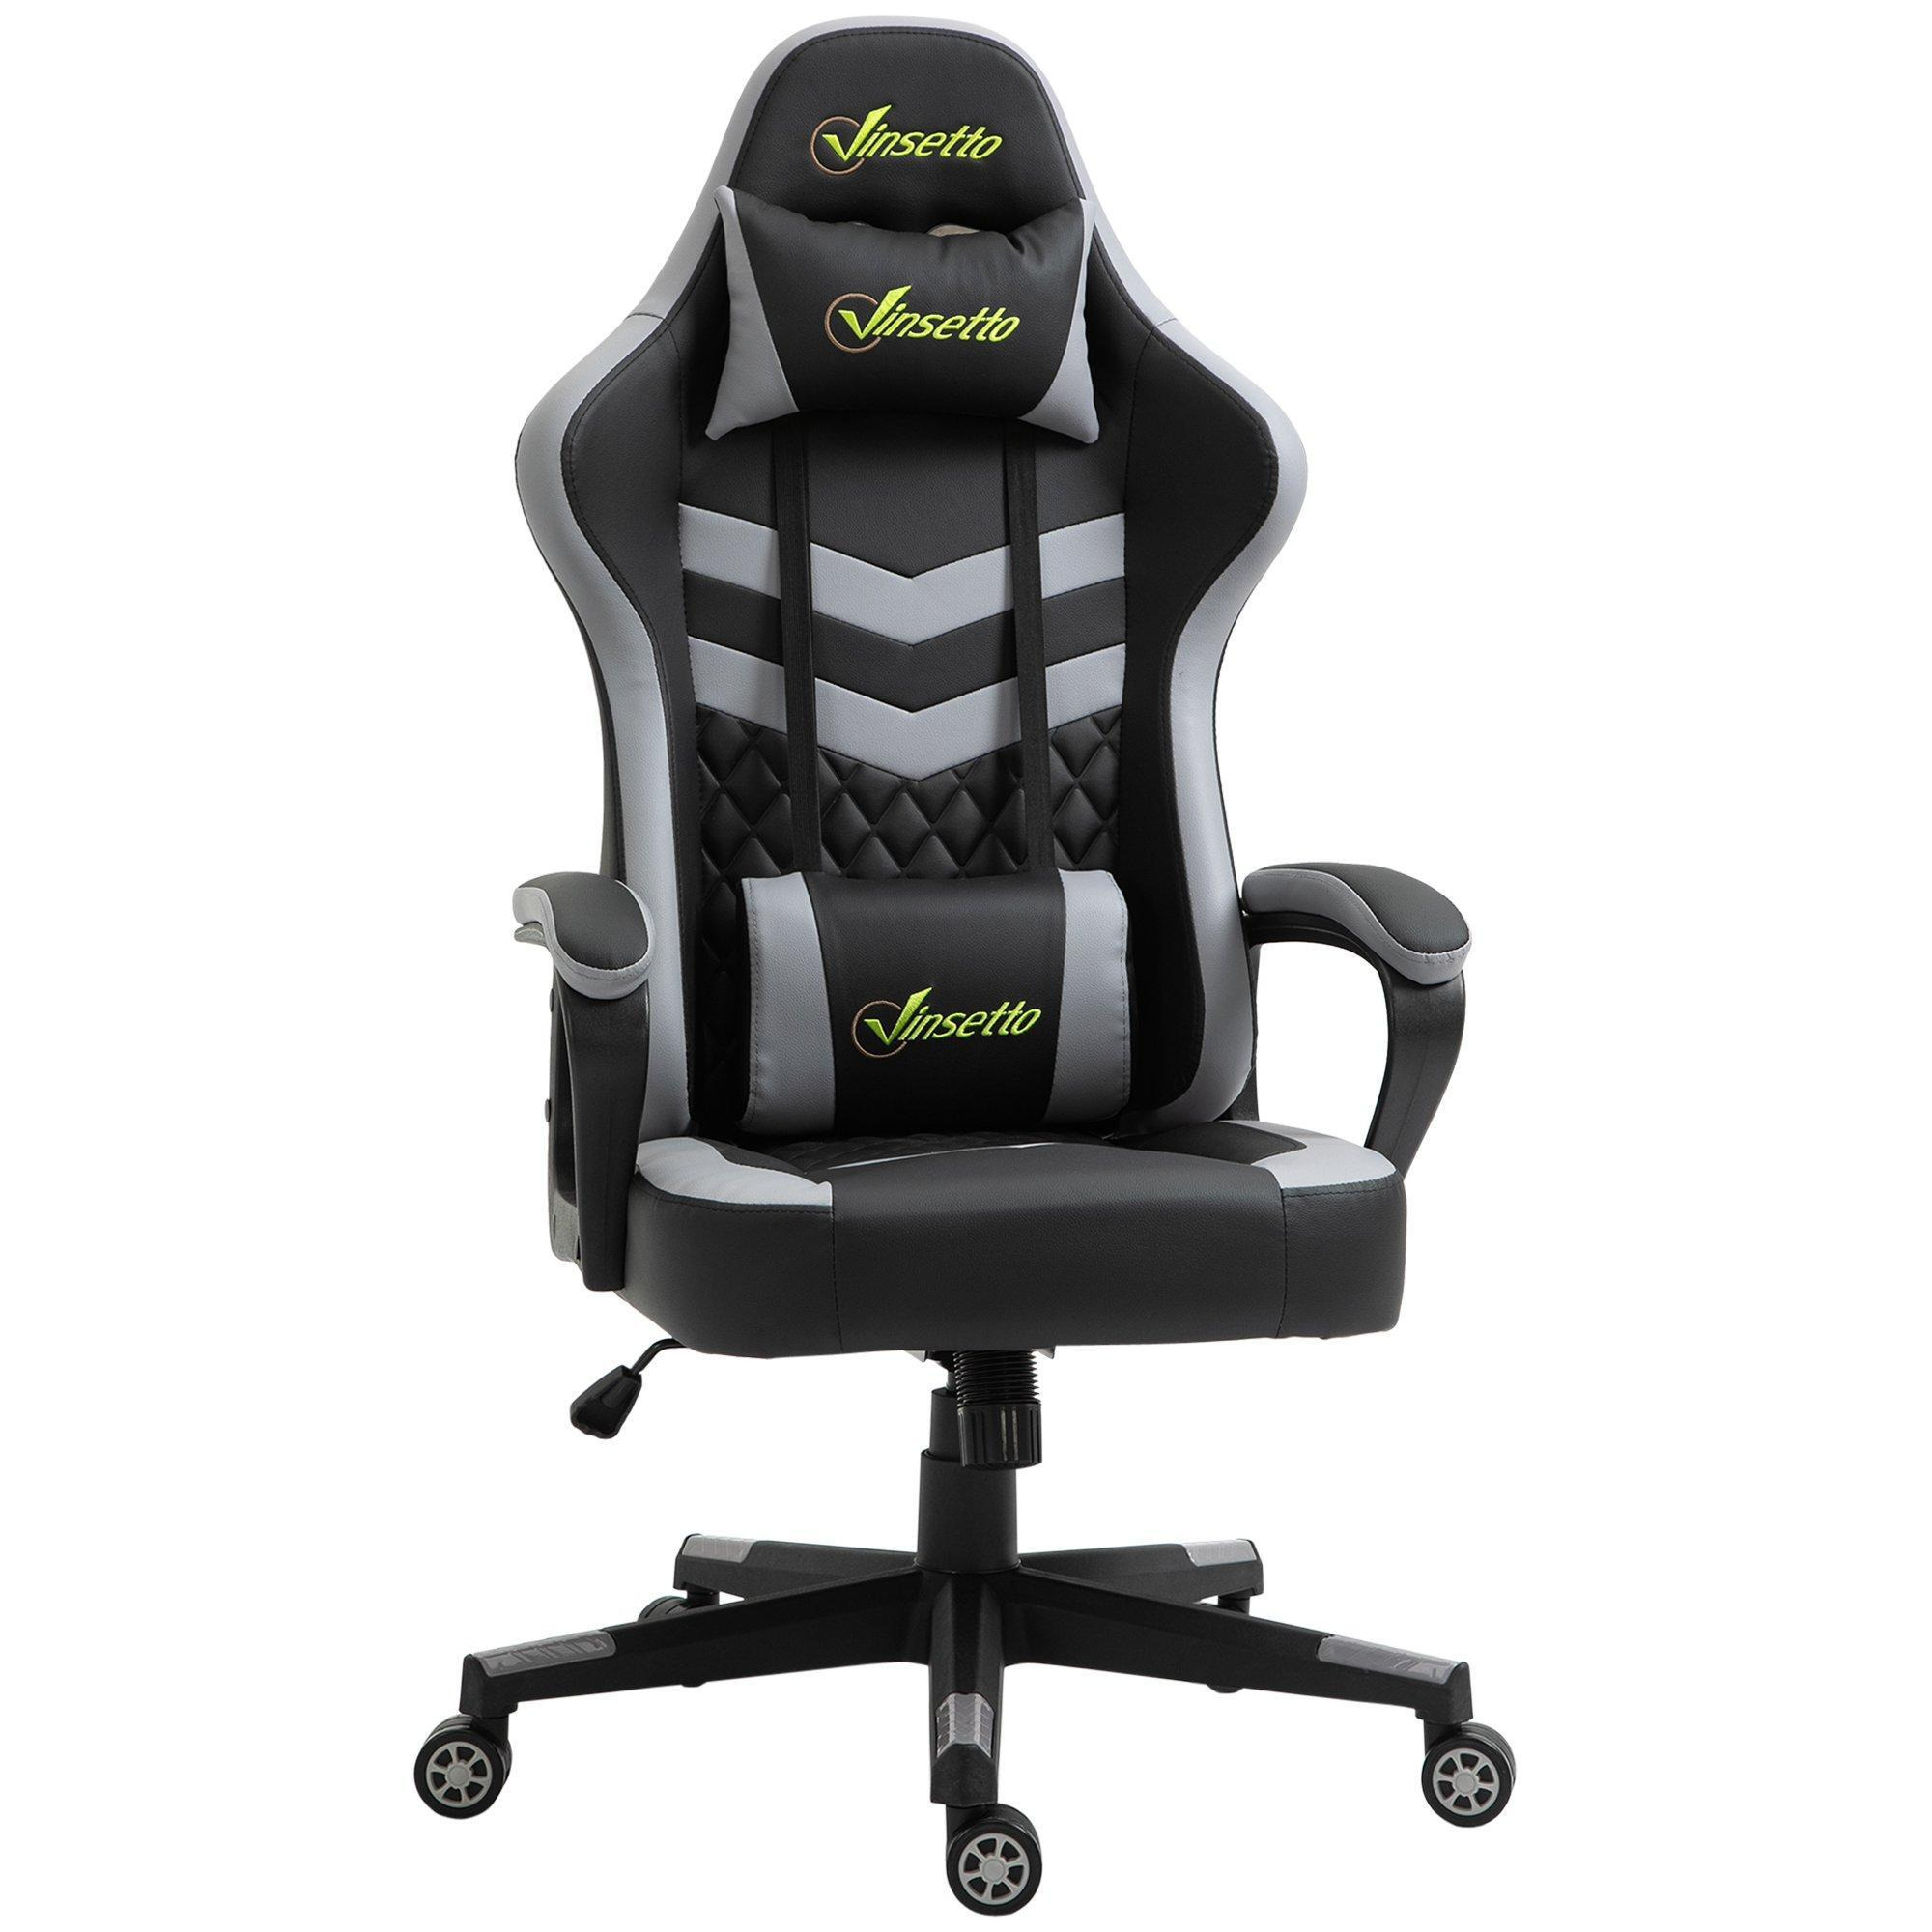 Racing Gaming Chair with Lumbar Support, Headrest, Gamer Office Chair - image 1